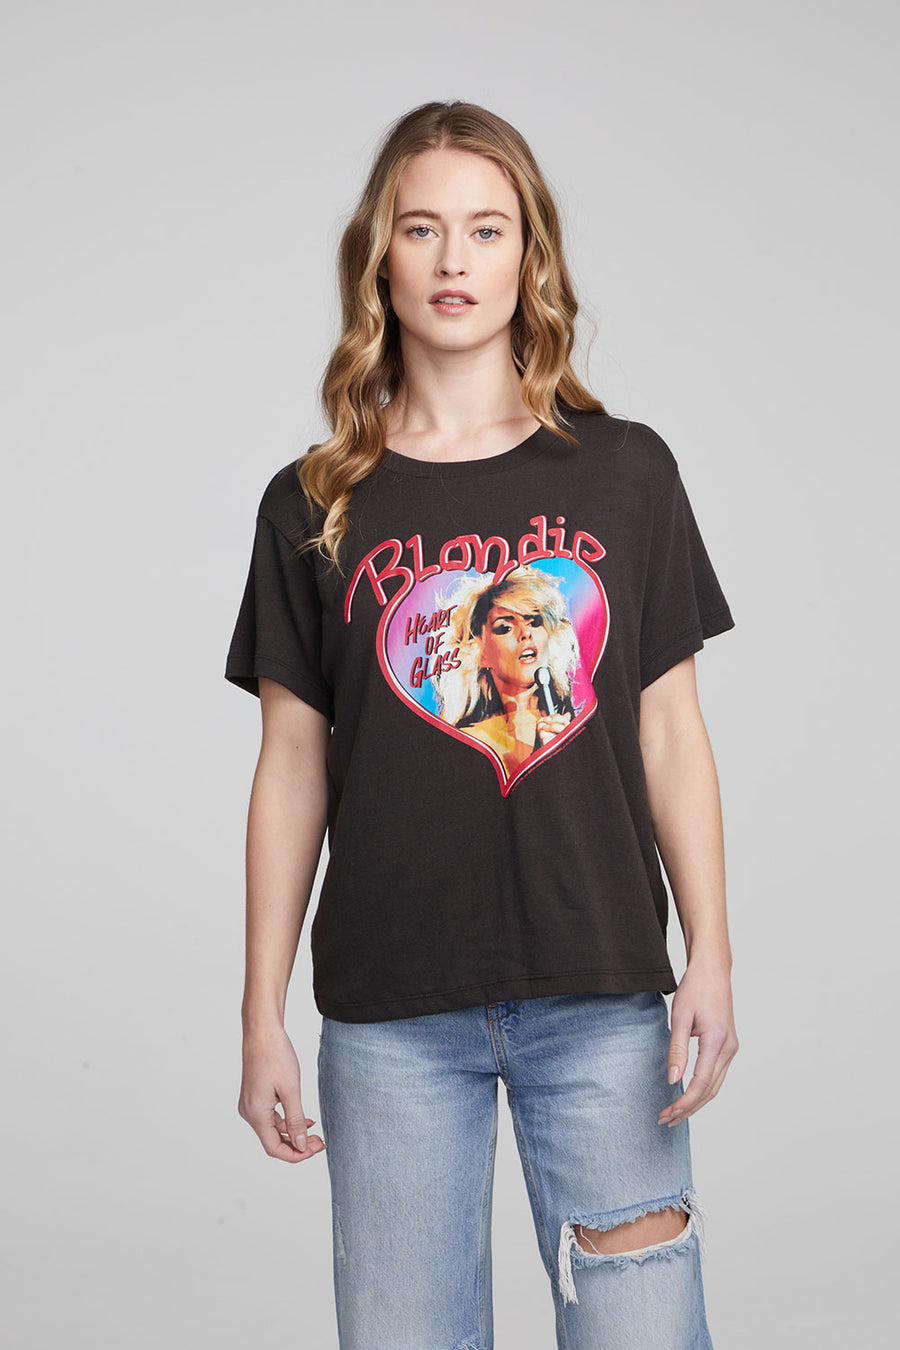 Blondie Heart Of Gold Tee WOMENS chaserbrand